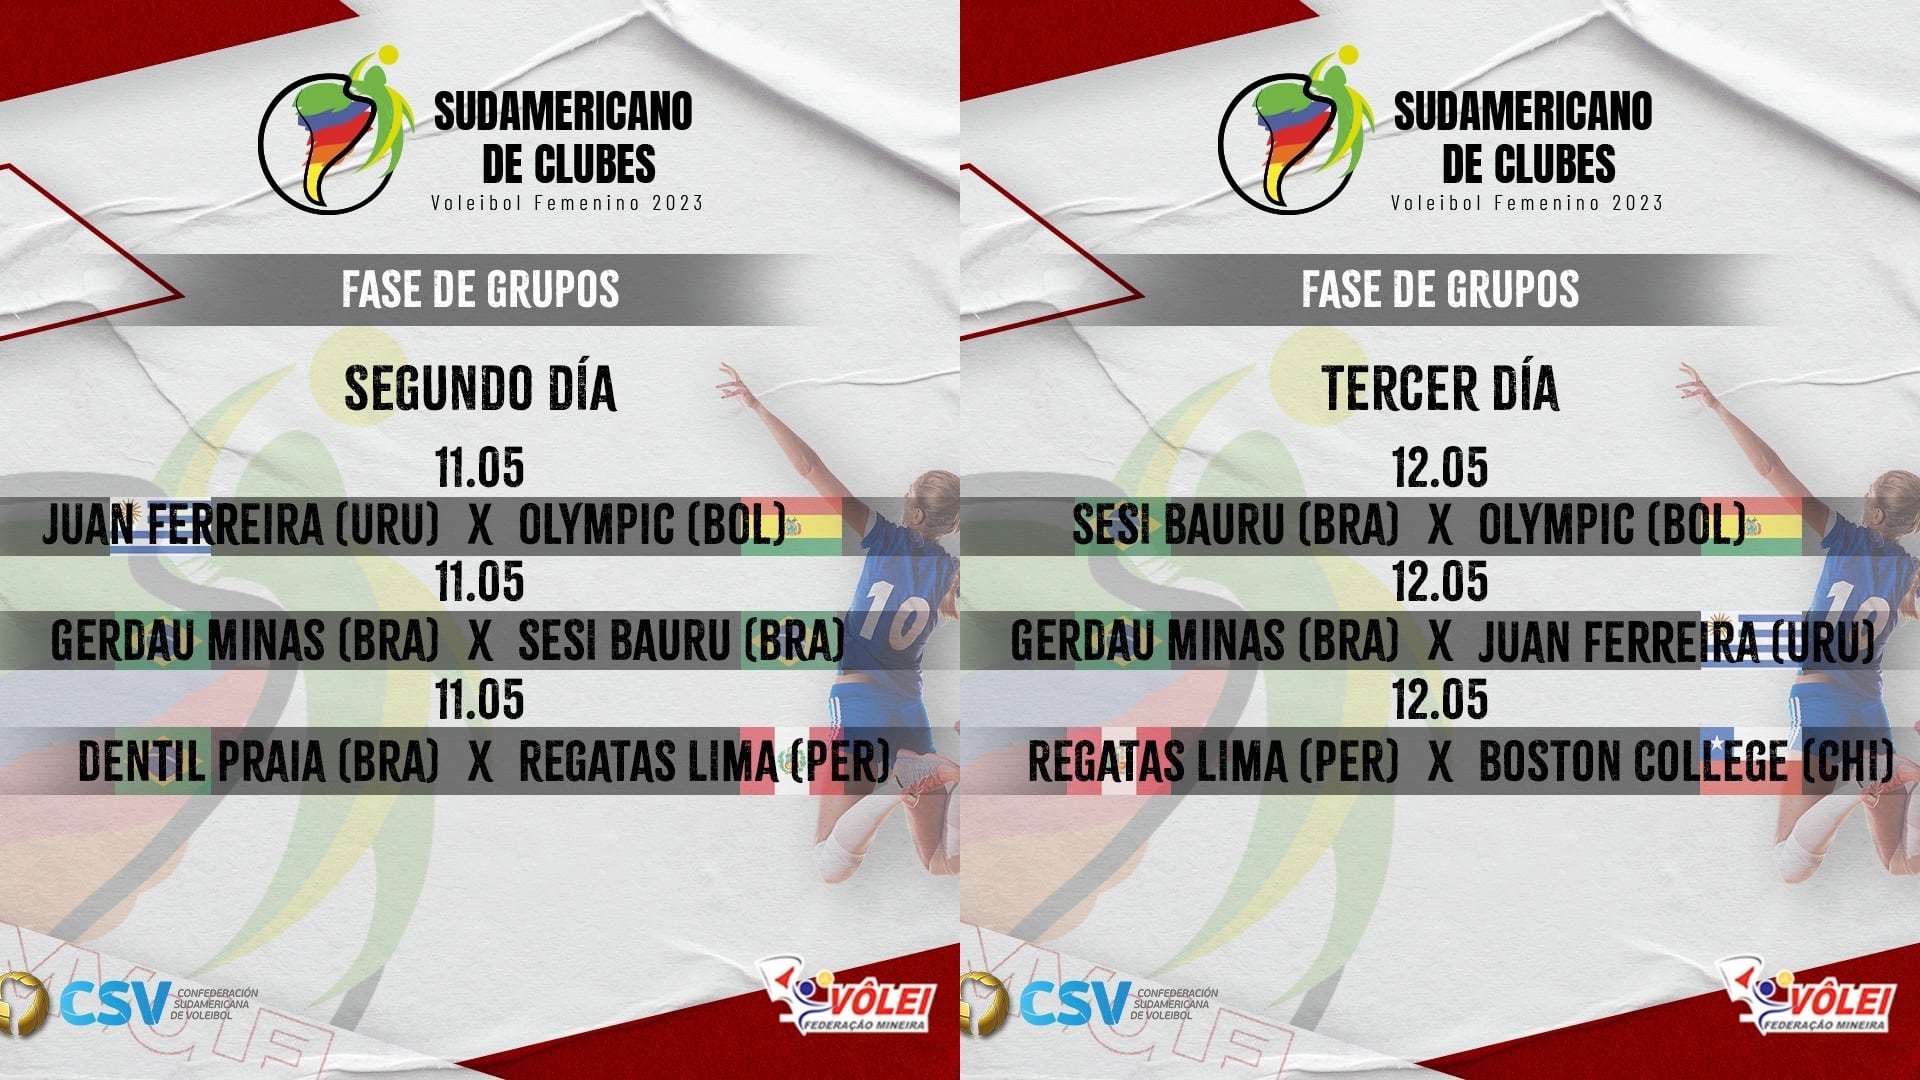 Fixture on how the 2023 South American Club Championship will be played, in which Regatas Lima will participate.  (CSV)